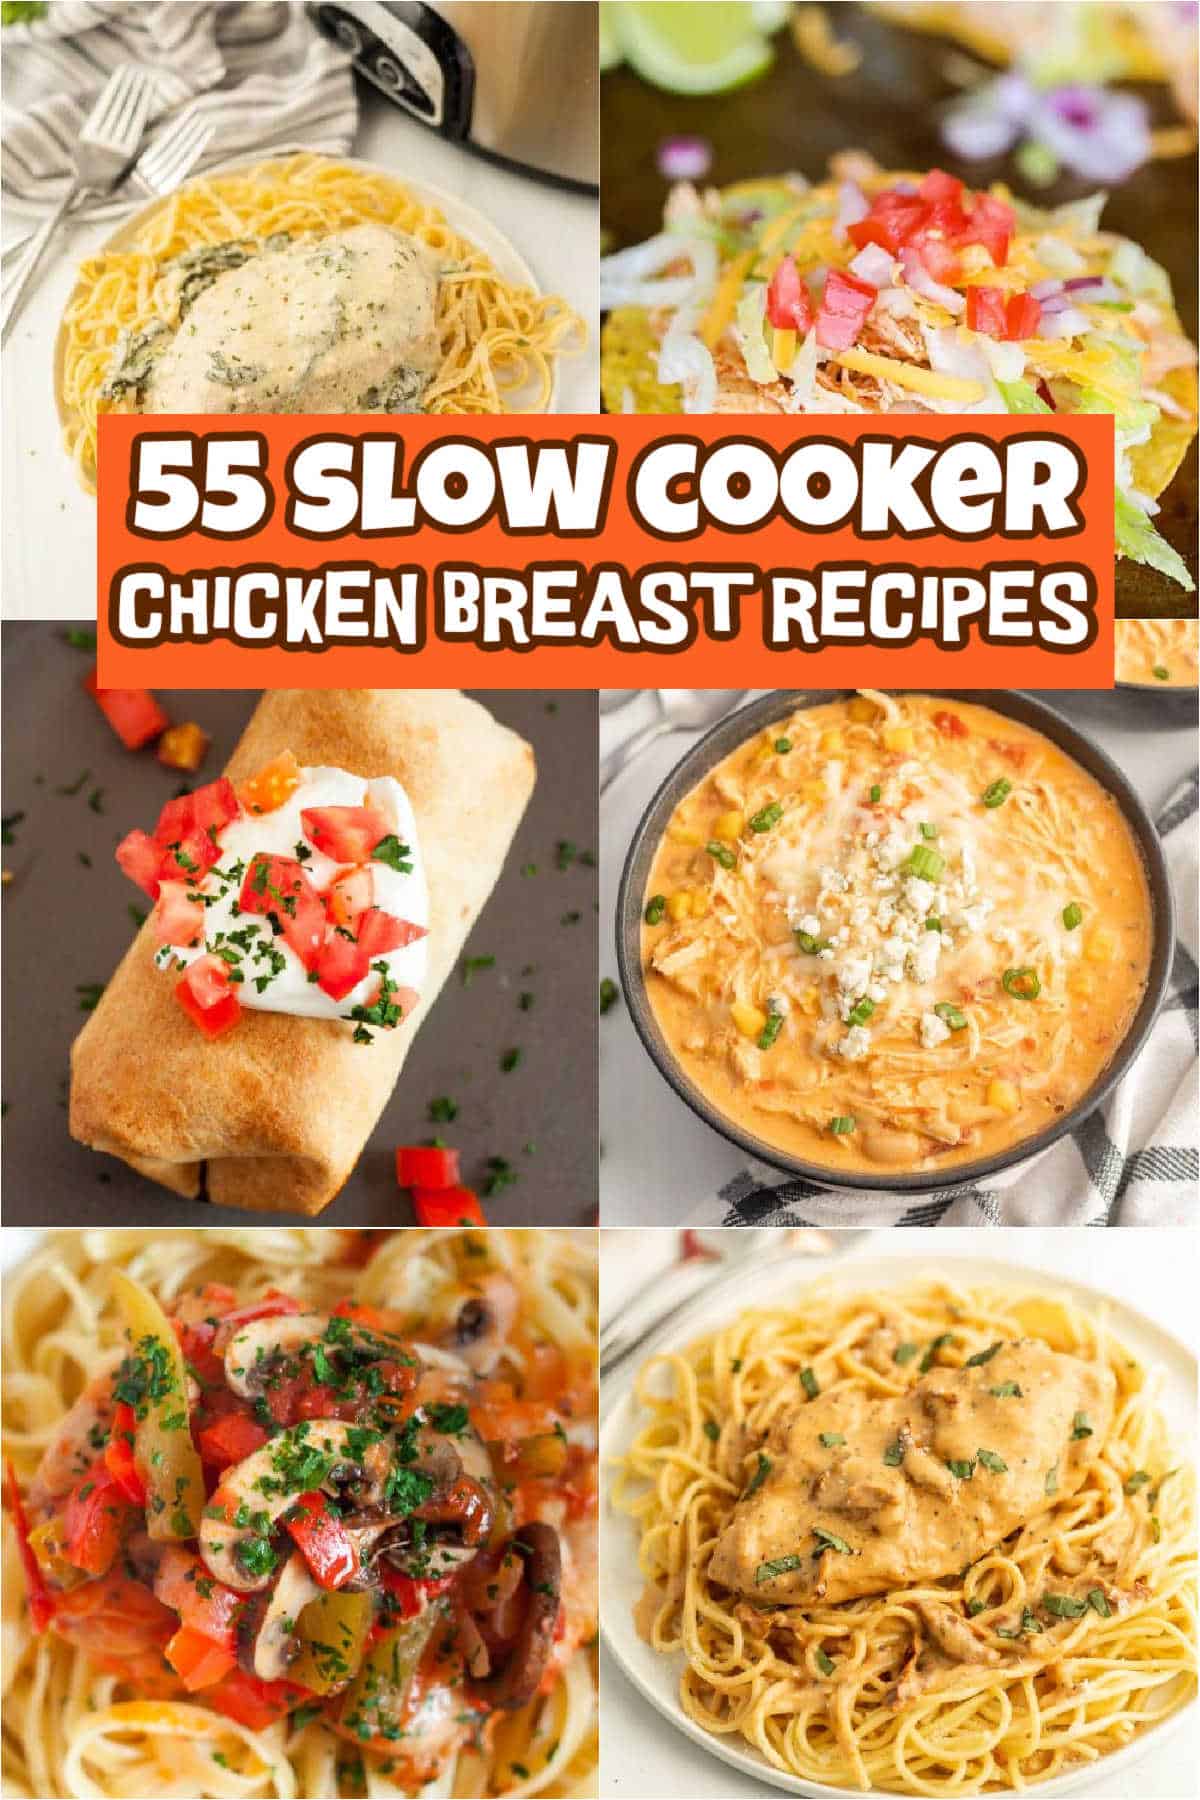 These Slow Cooker Chicken Breast Recipes make dinnertime a breeze. You will love these 55 recipes that are easy to make with simple ingredients. Chicken cooks tender, juicy and full of flavor with these simple recipes.  #eatingonadime #slowcookerchickenbreastrecipes #chickenbreastrecipes